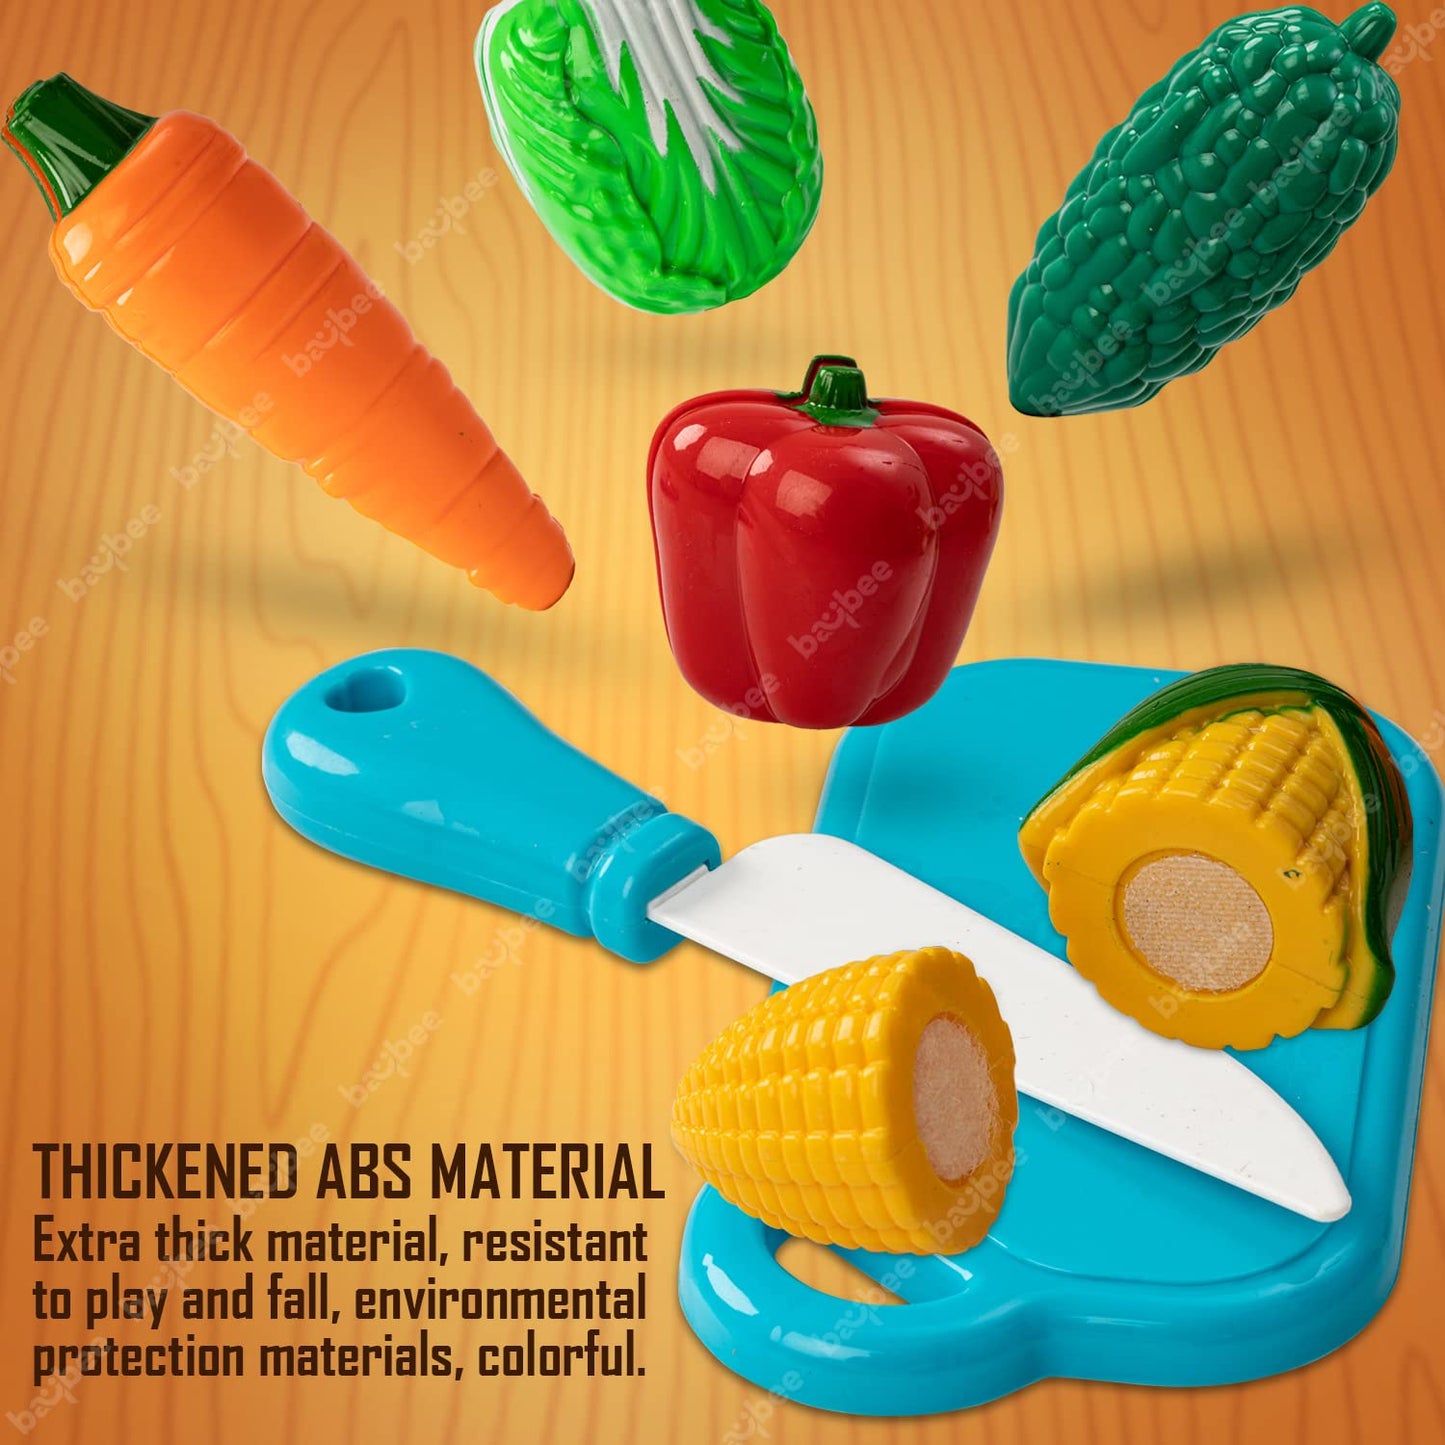 Baybee Vegetables Cutting Toys Playset Kitchen